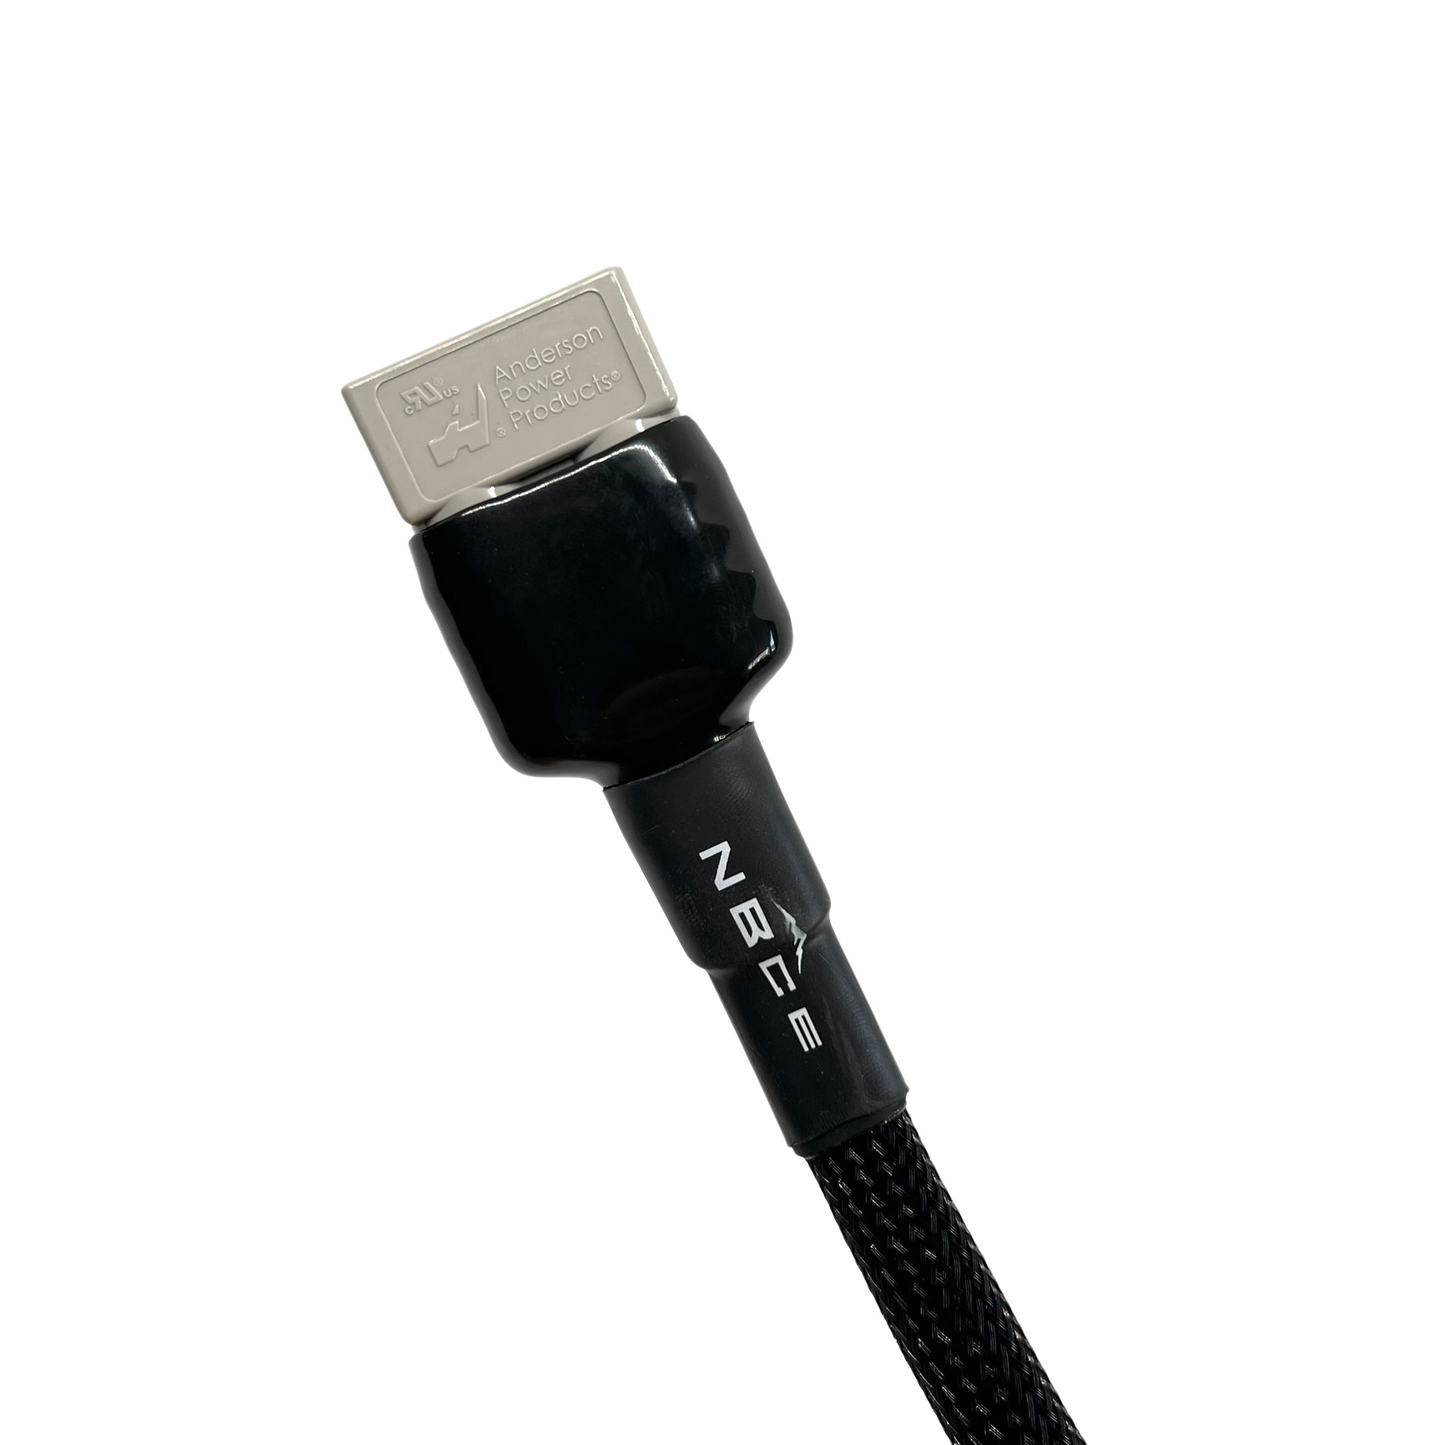 Sleeved Anderson Cable - 13 AWG (2.90mm2)